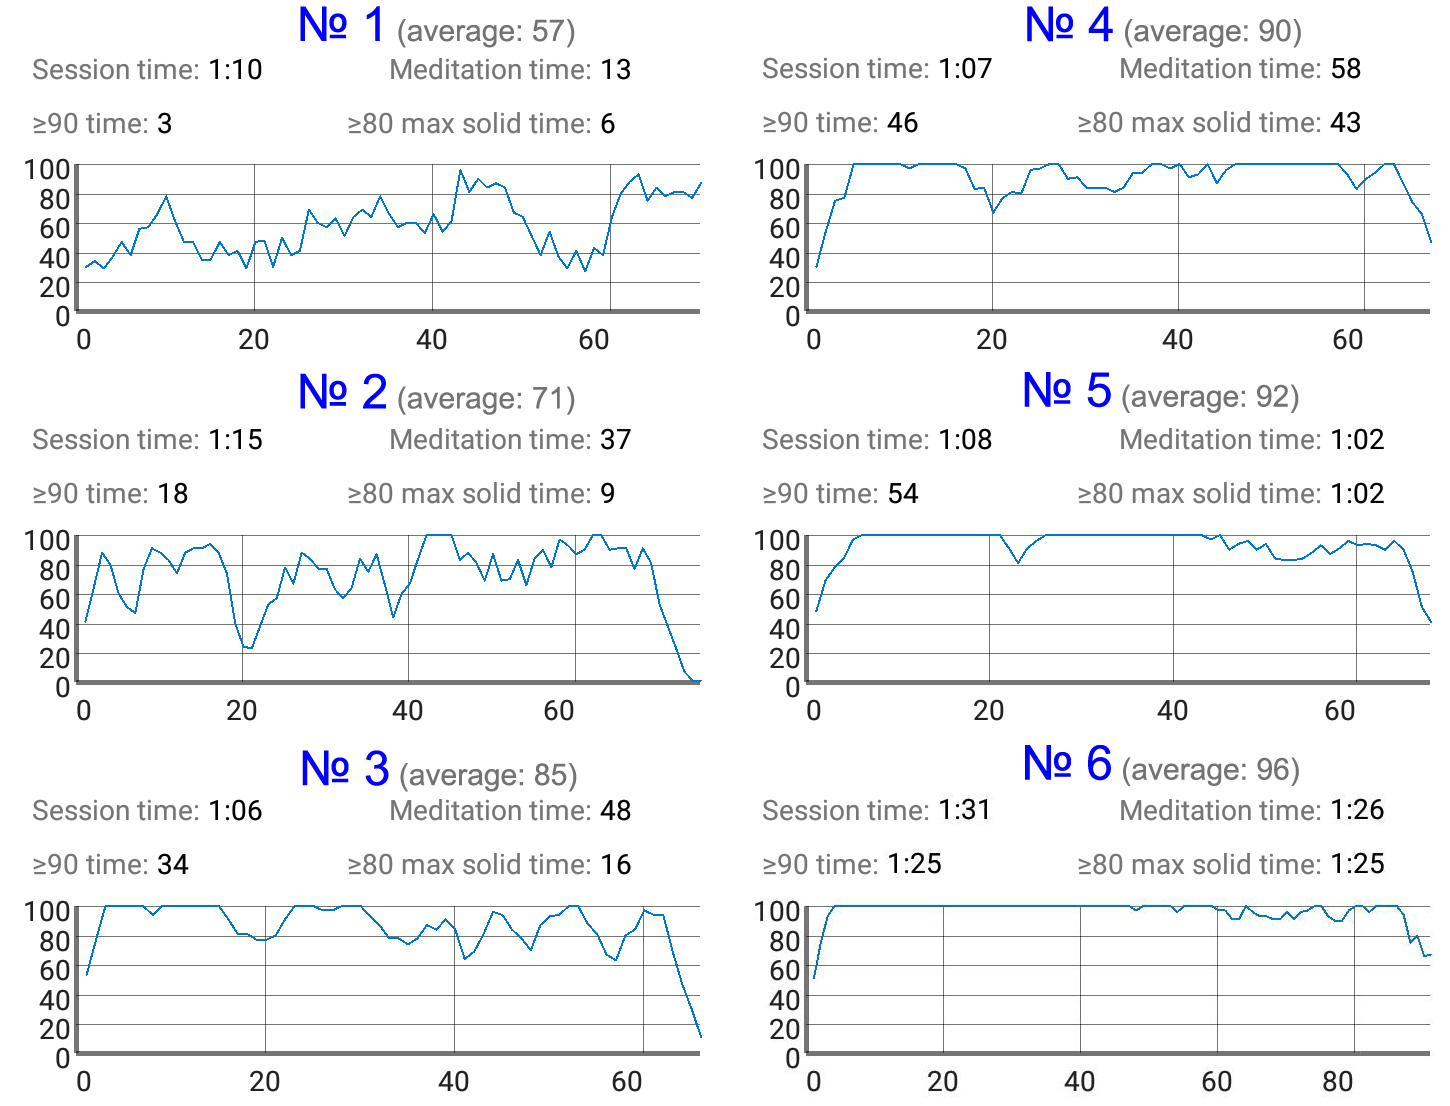 Screenshot fragments of 6 meditation sessions in the EEG Meditation application for Android